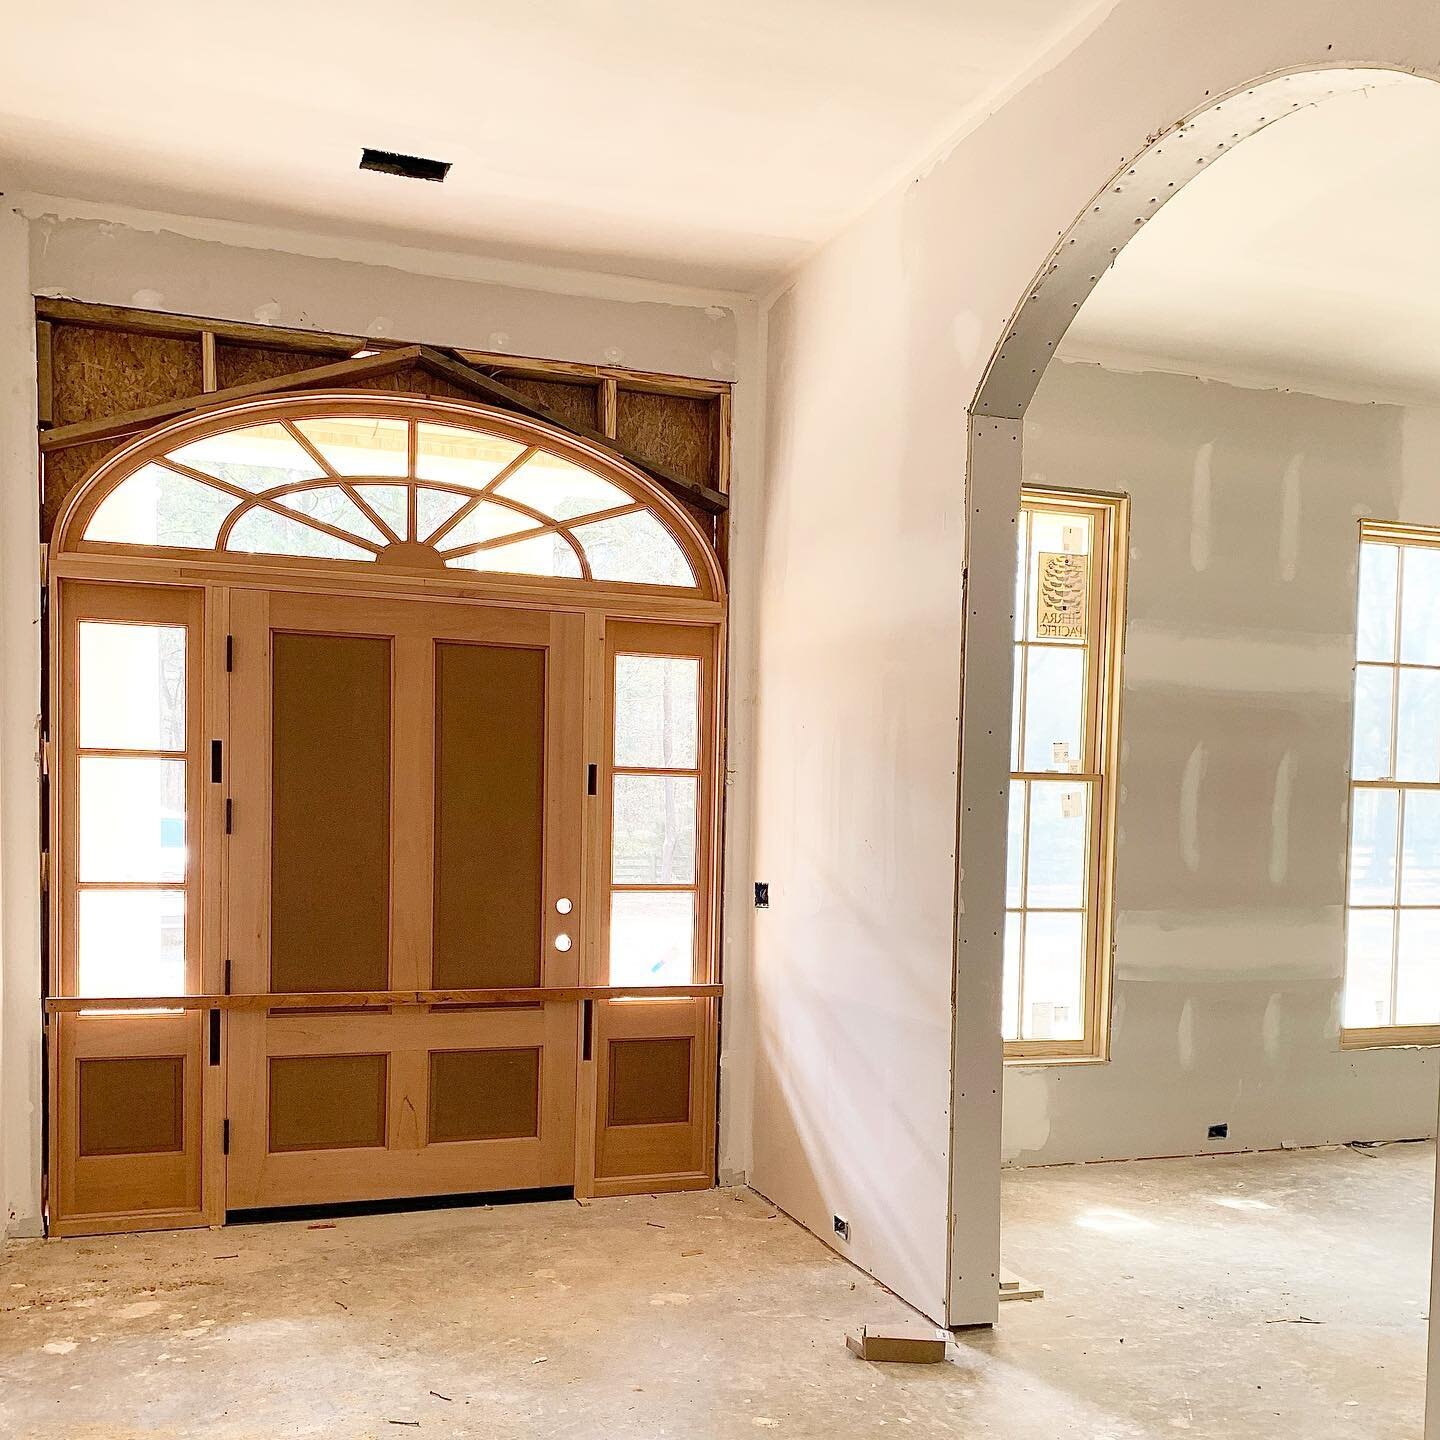 I just love a wide front door 🤍🤍 going to be a good one! #interiordesign #architecture #construction #foyer #southernliving #traditionalhome #interiors